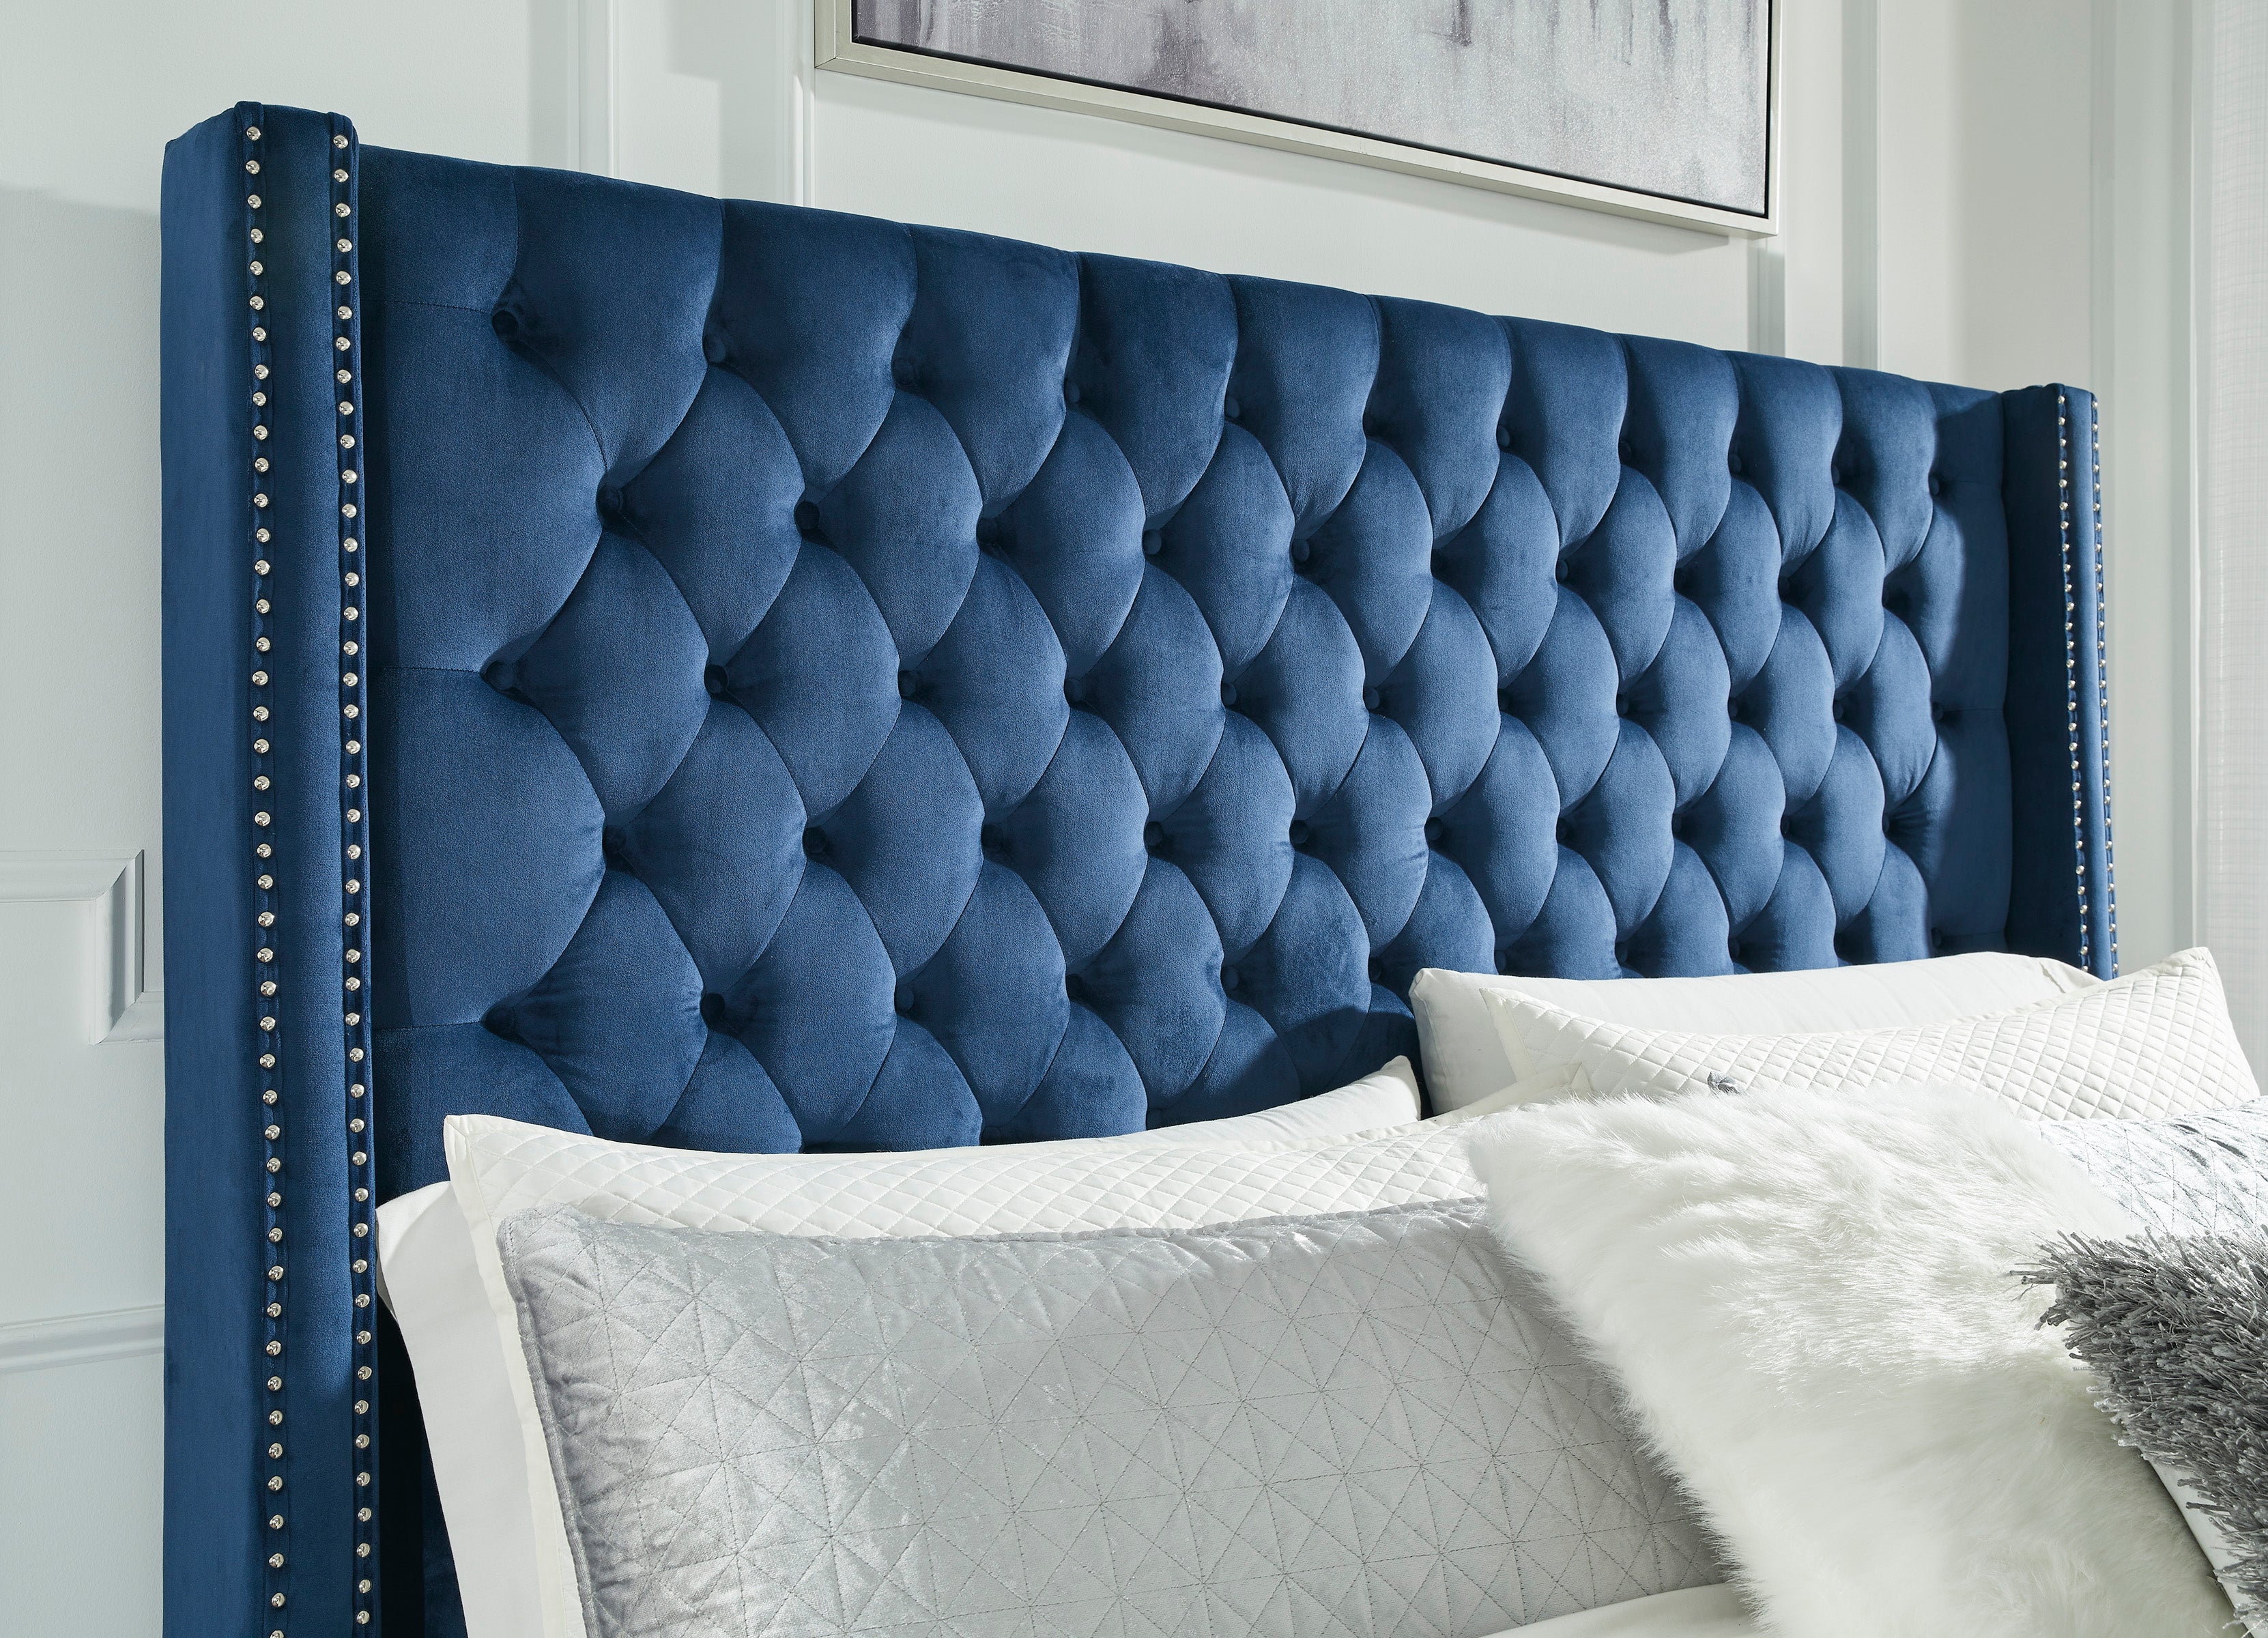 Coralayne King Upholstered Bed